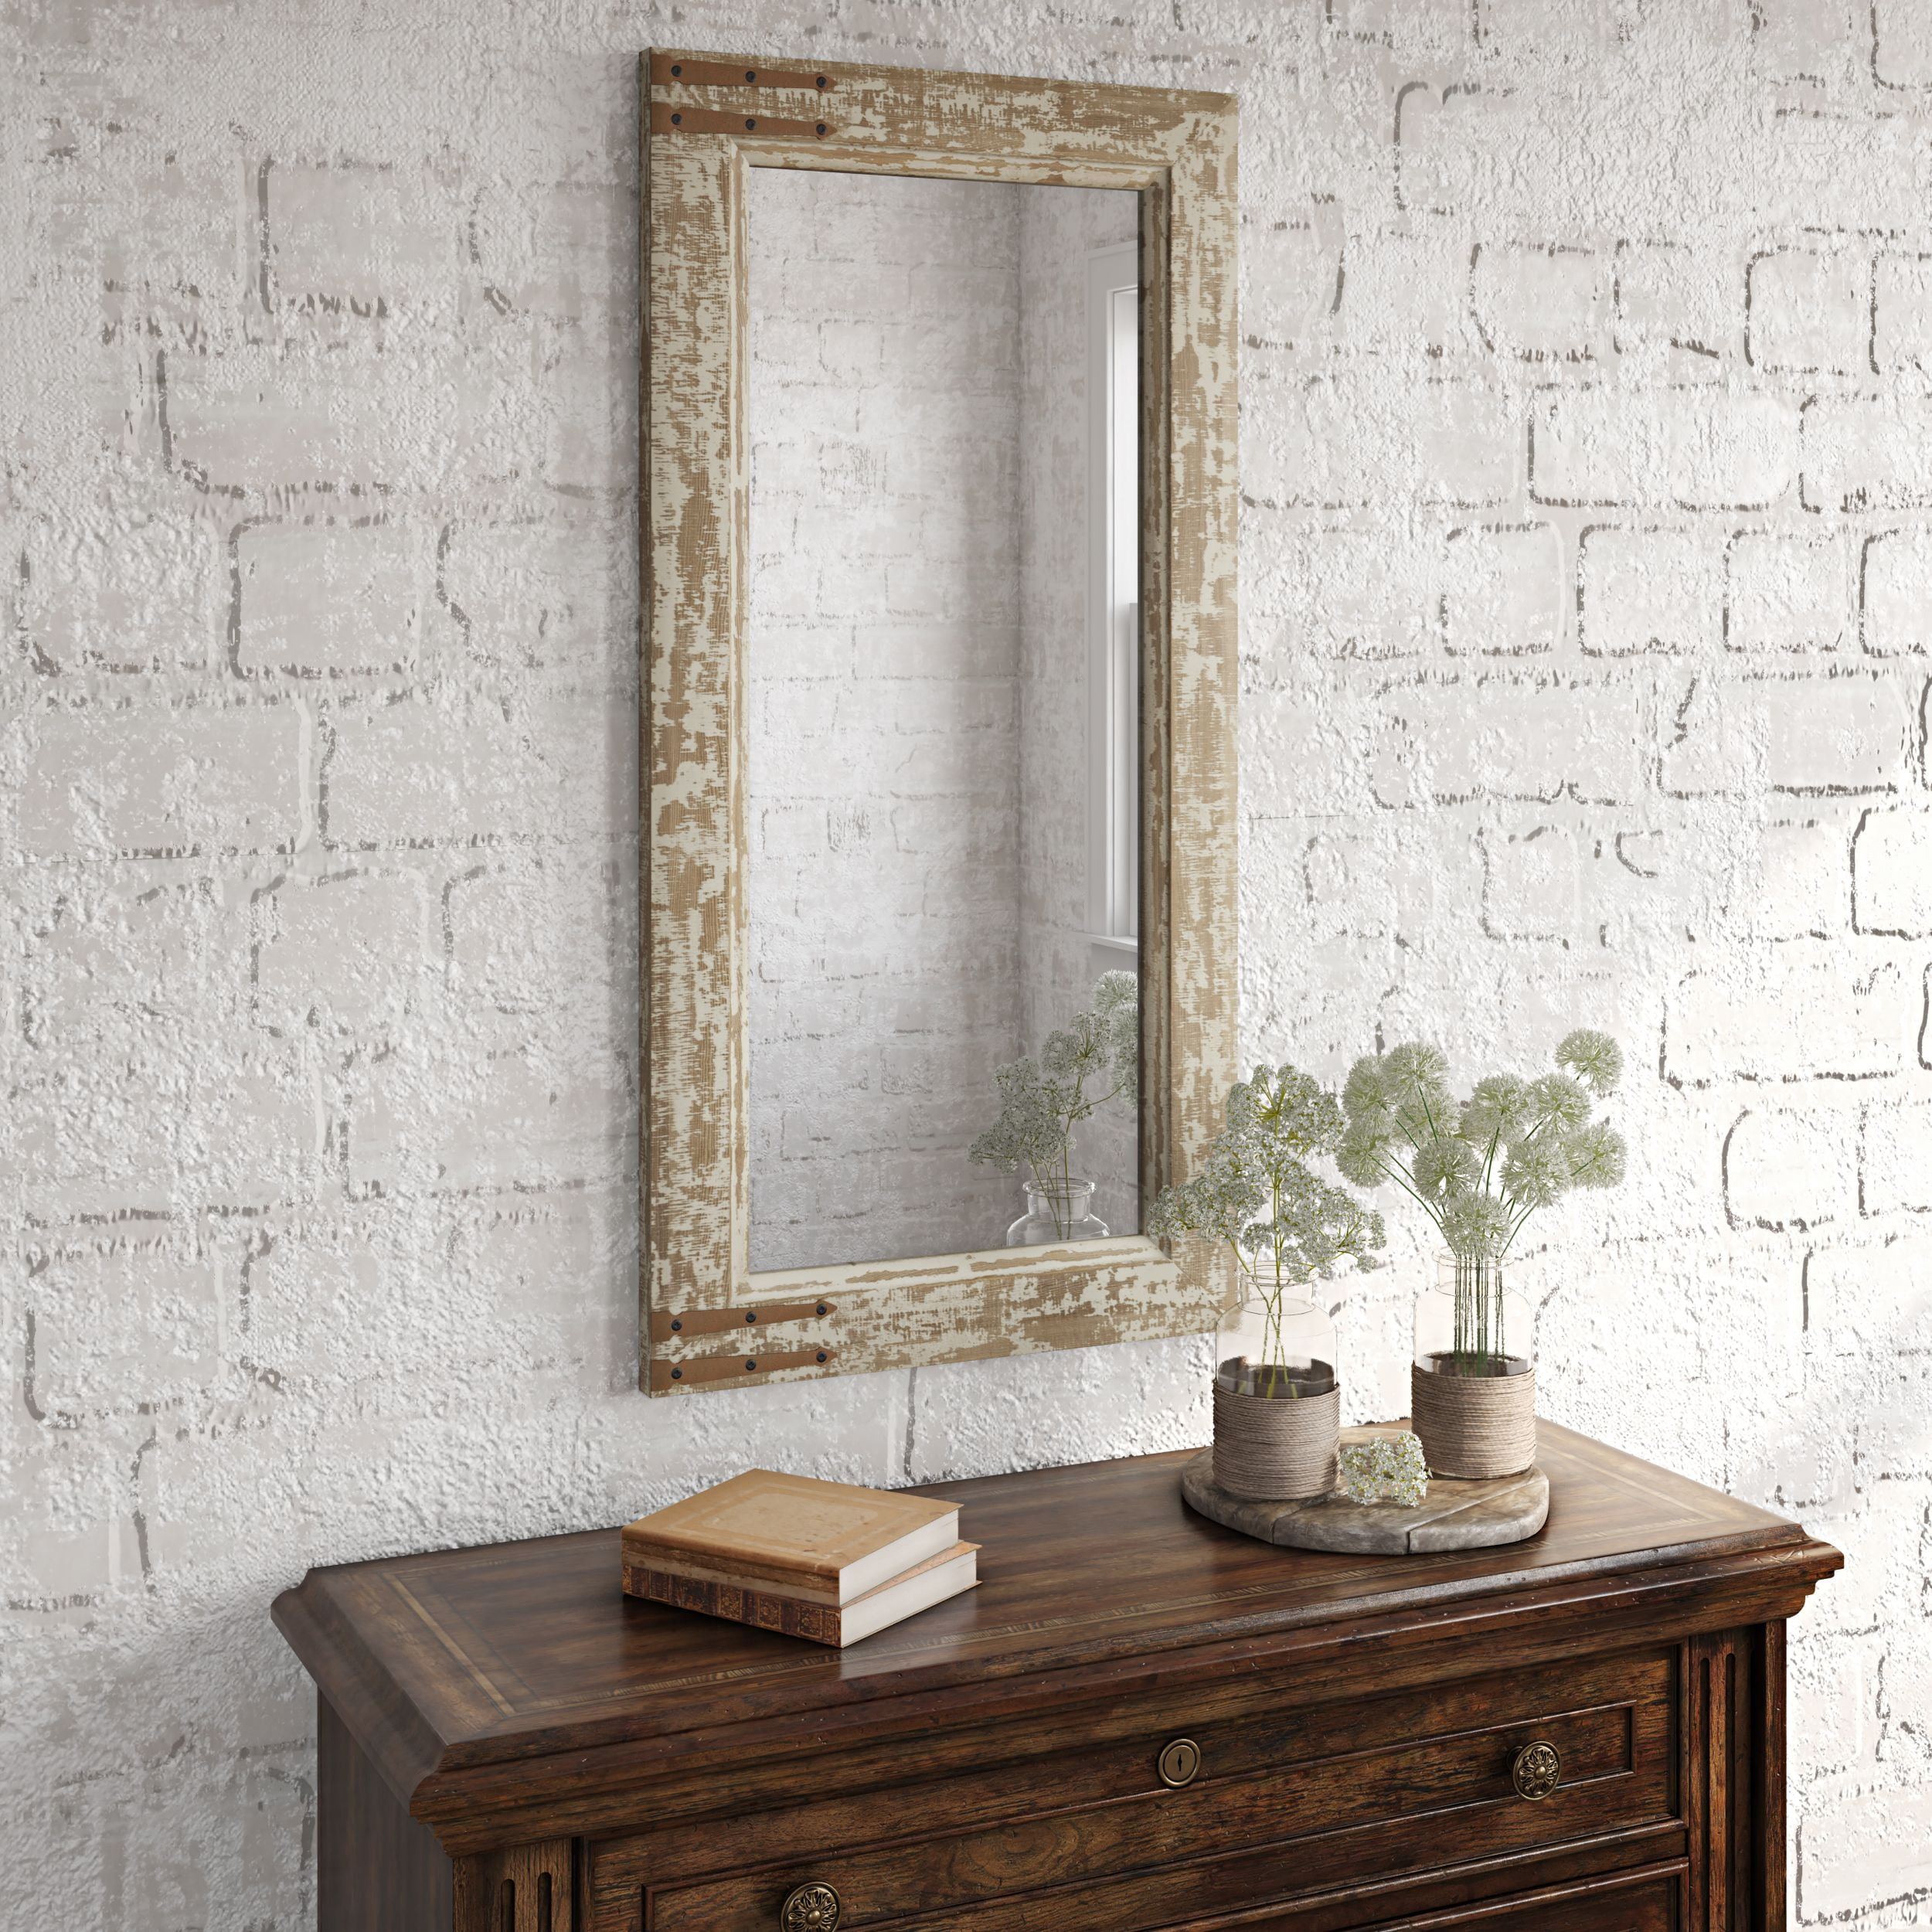 Aspire Home Accents Sonali Rustic Distressed Wood Farmhouse Wall Mirror